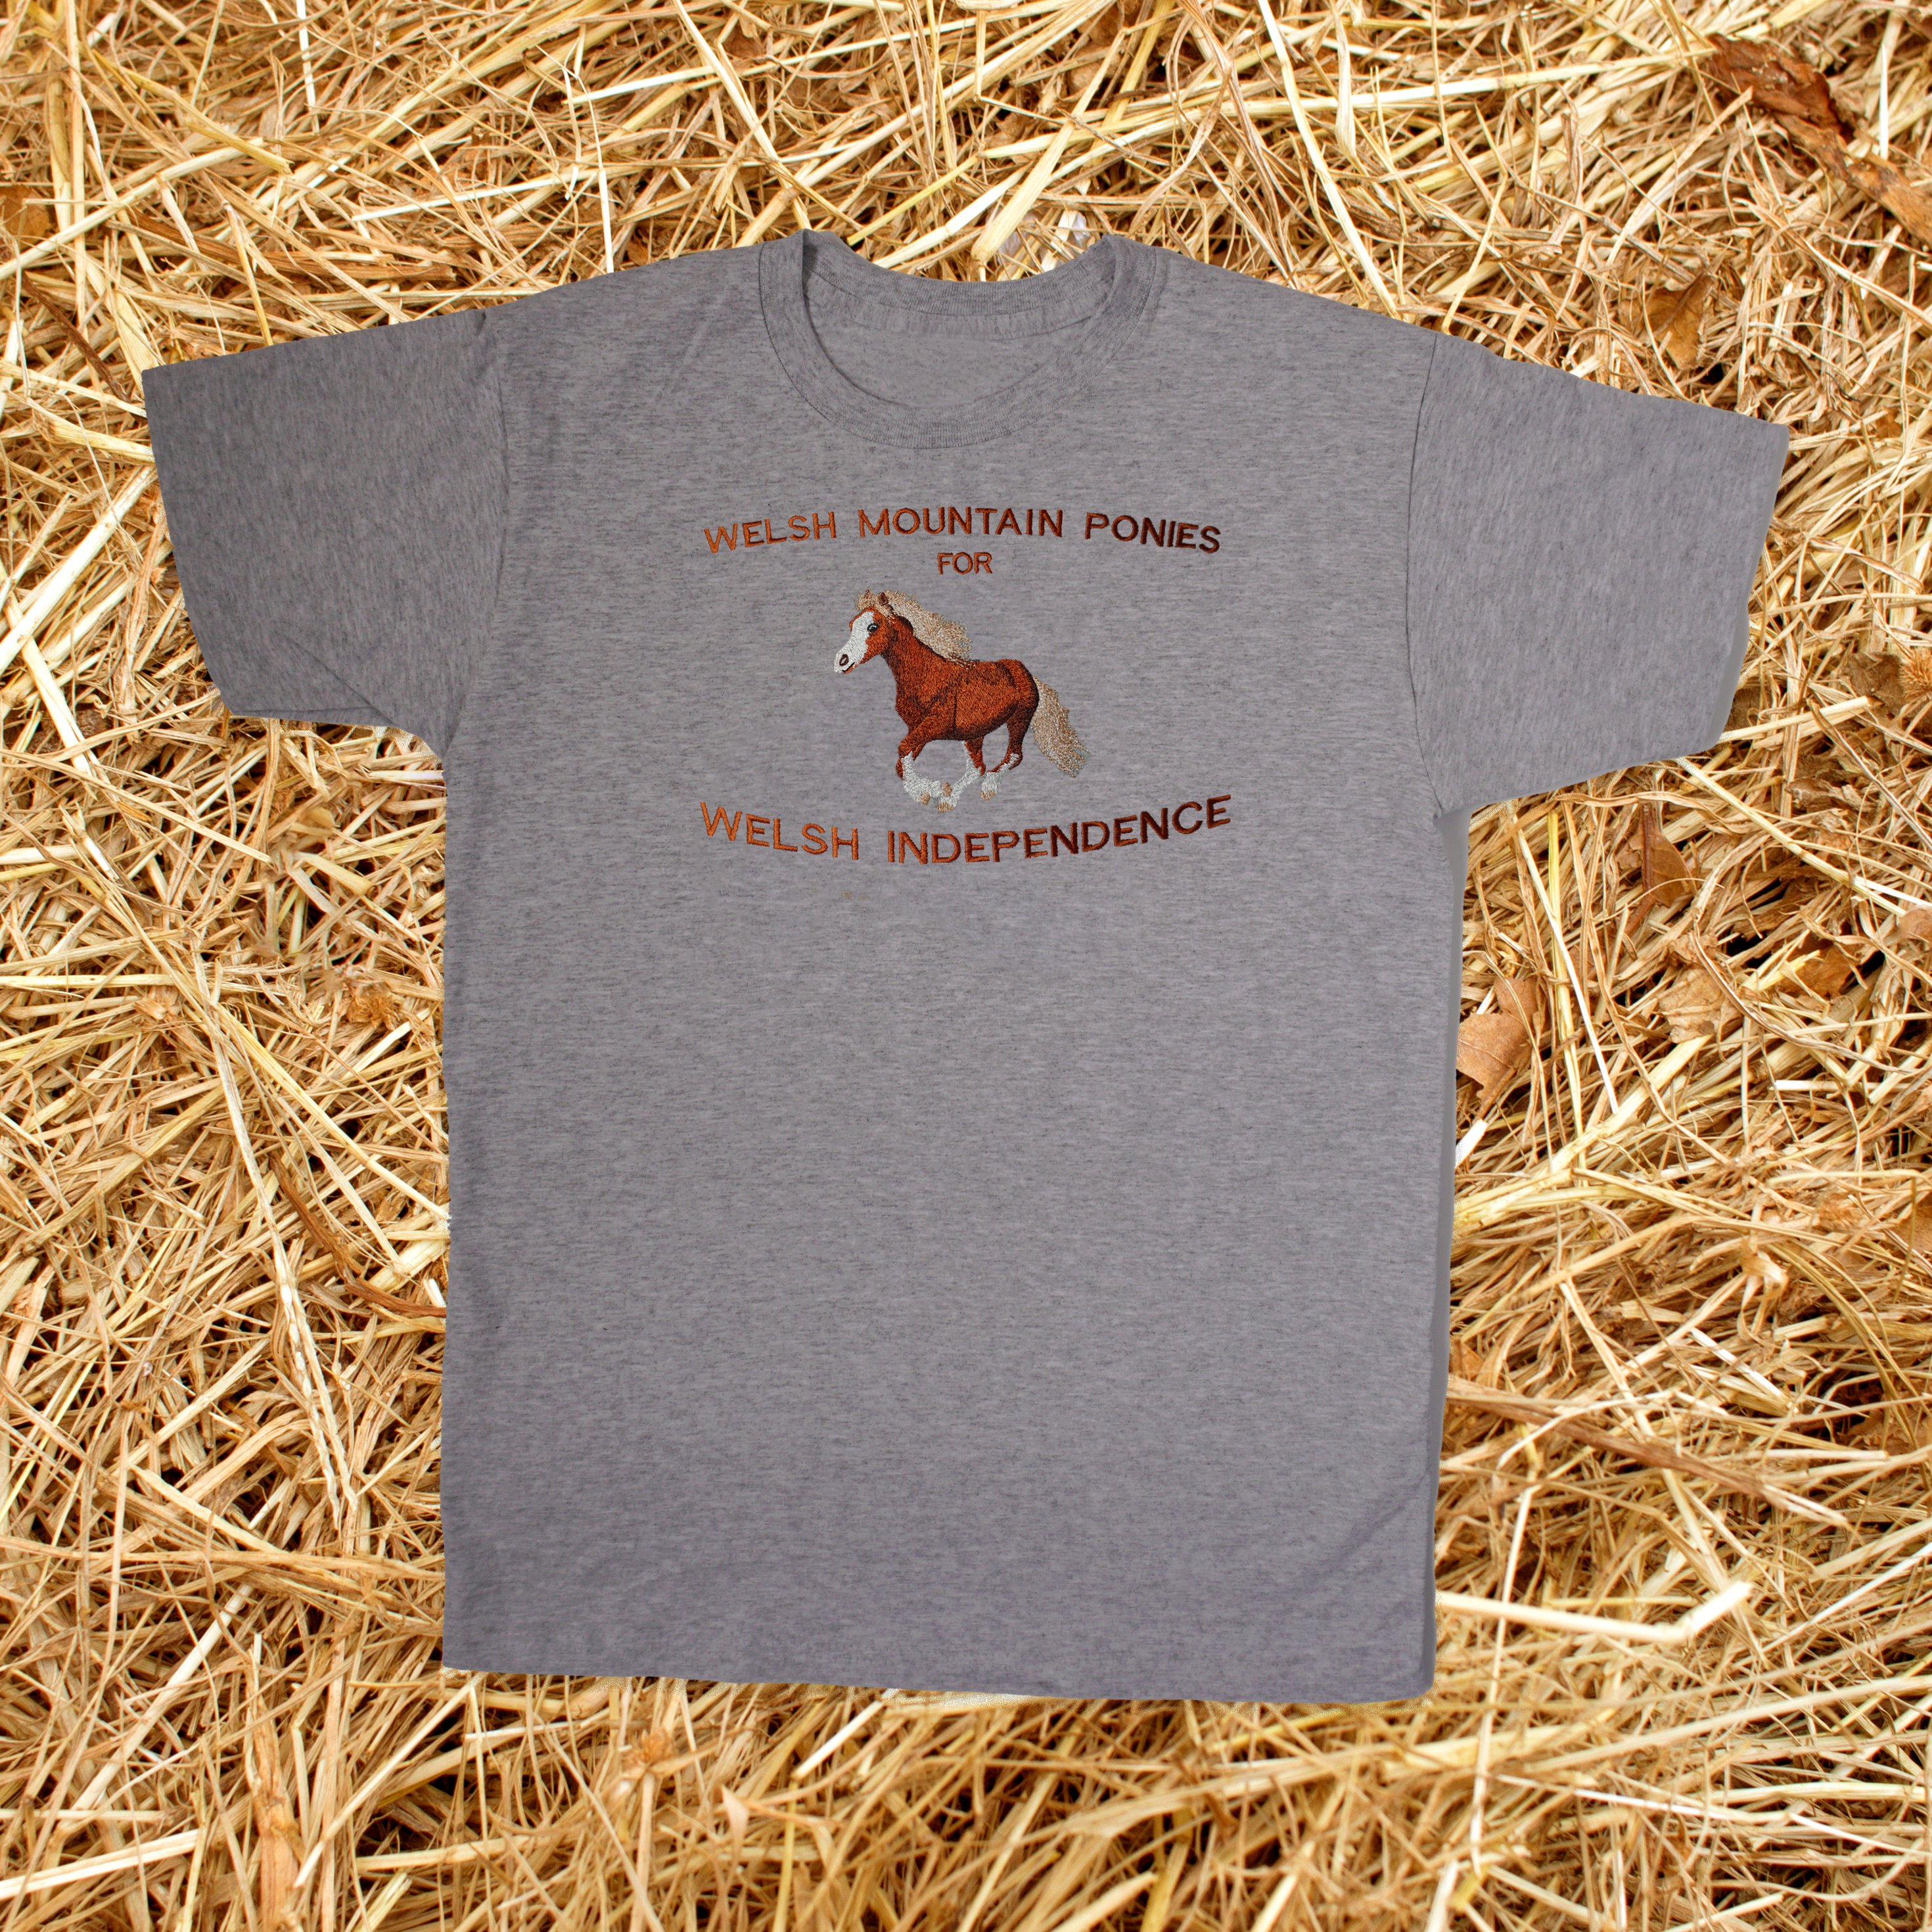 MOUNTAIN PONIES FOR WELSH INDEPENDENCE T-SHIRT